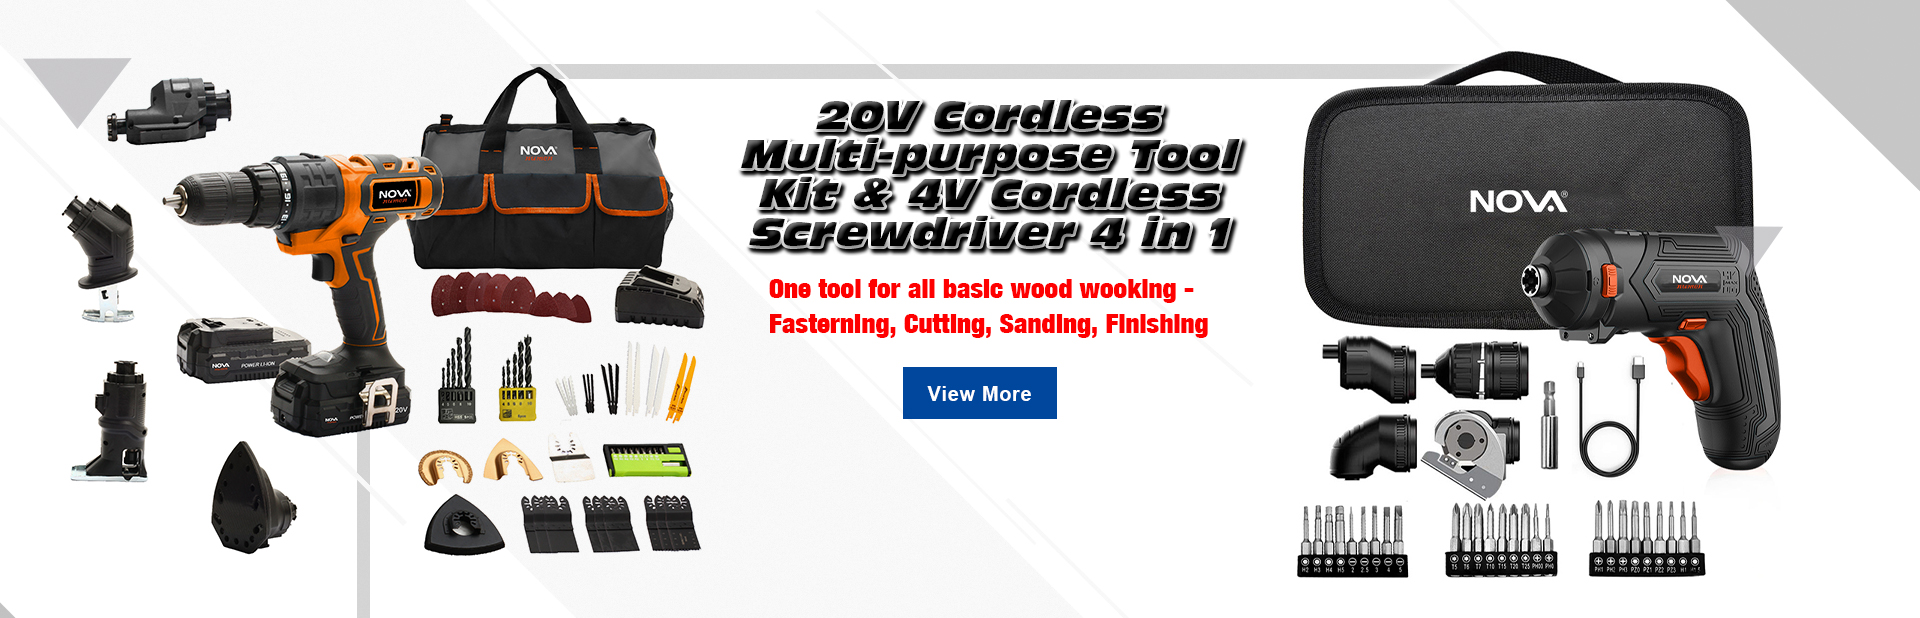 OTHER CORDLESS TOOLS